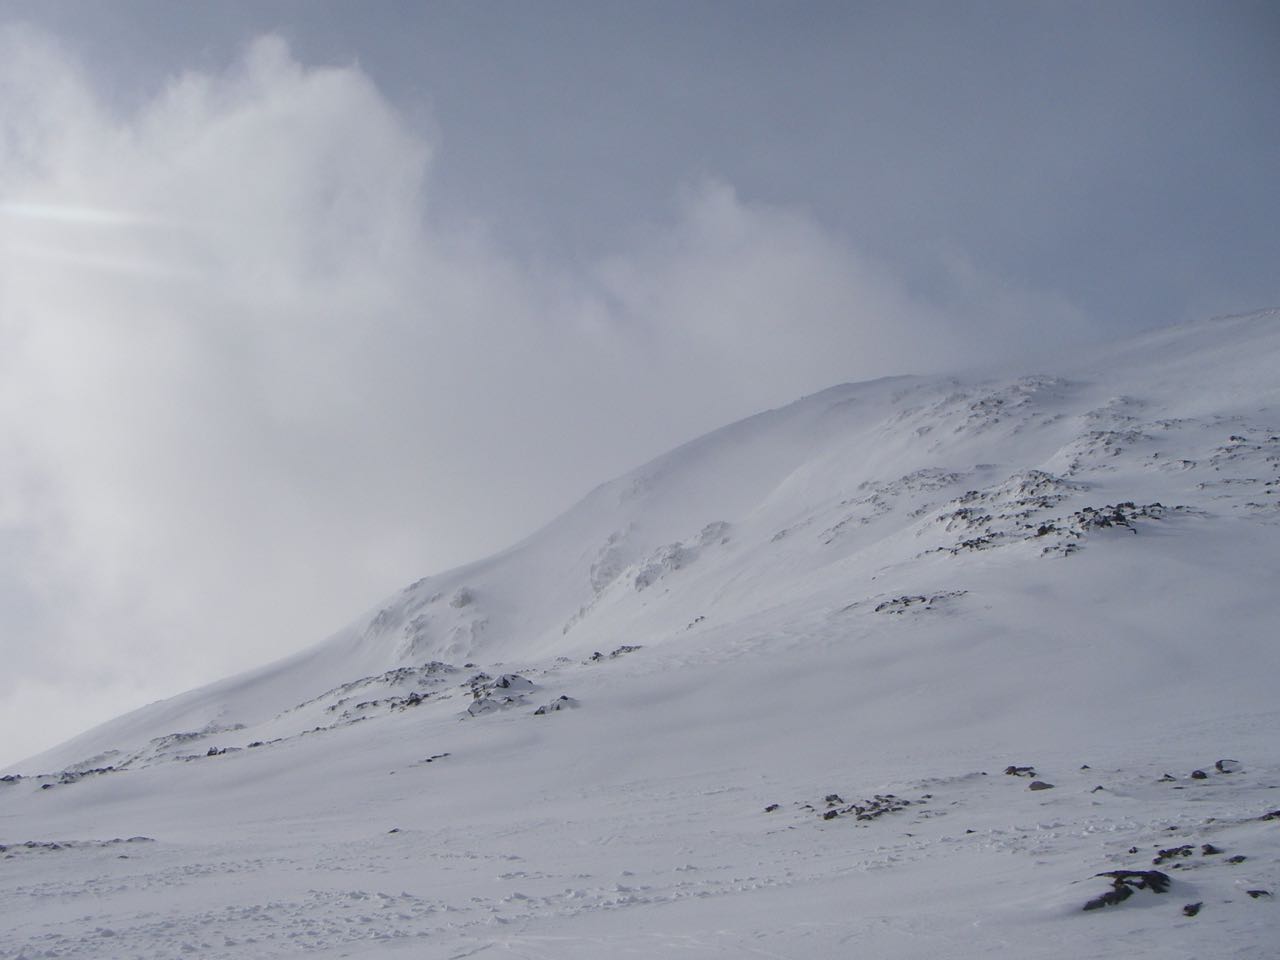 The East ridge of Meall a Bhuiridh with the steeper ski runs on its North flank